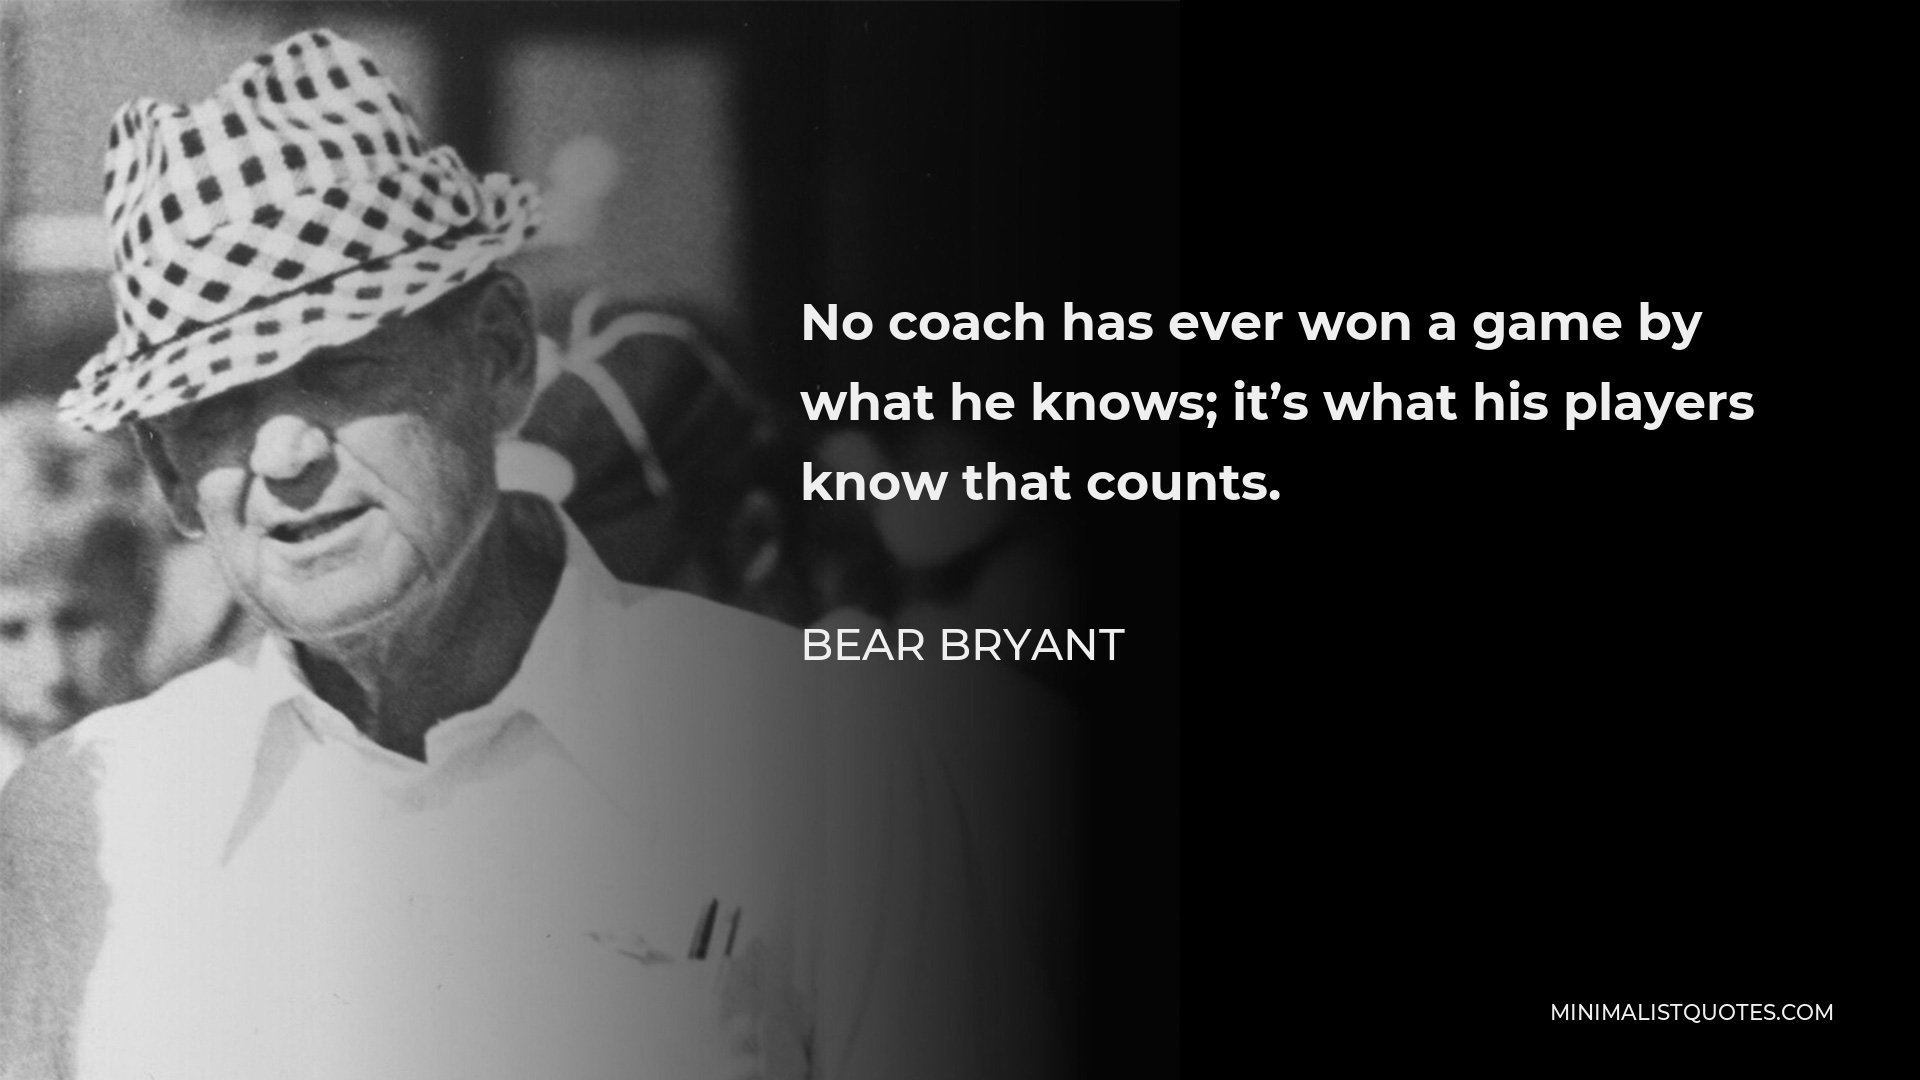 Bear Bryant Quote - No coach has ever won a game by what he knows; it’s what his players know that counts.